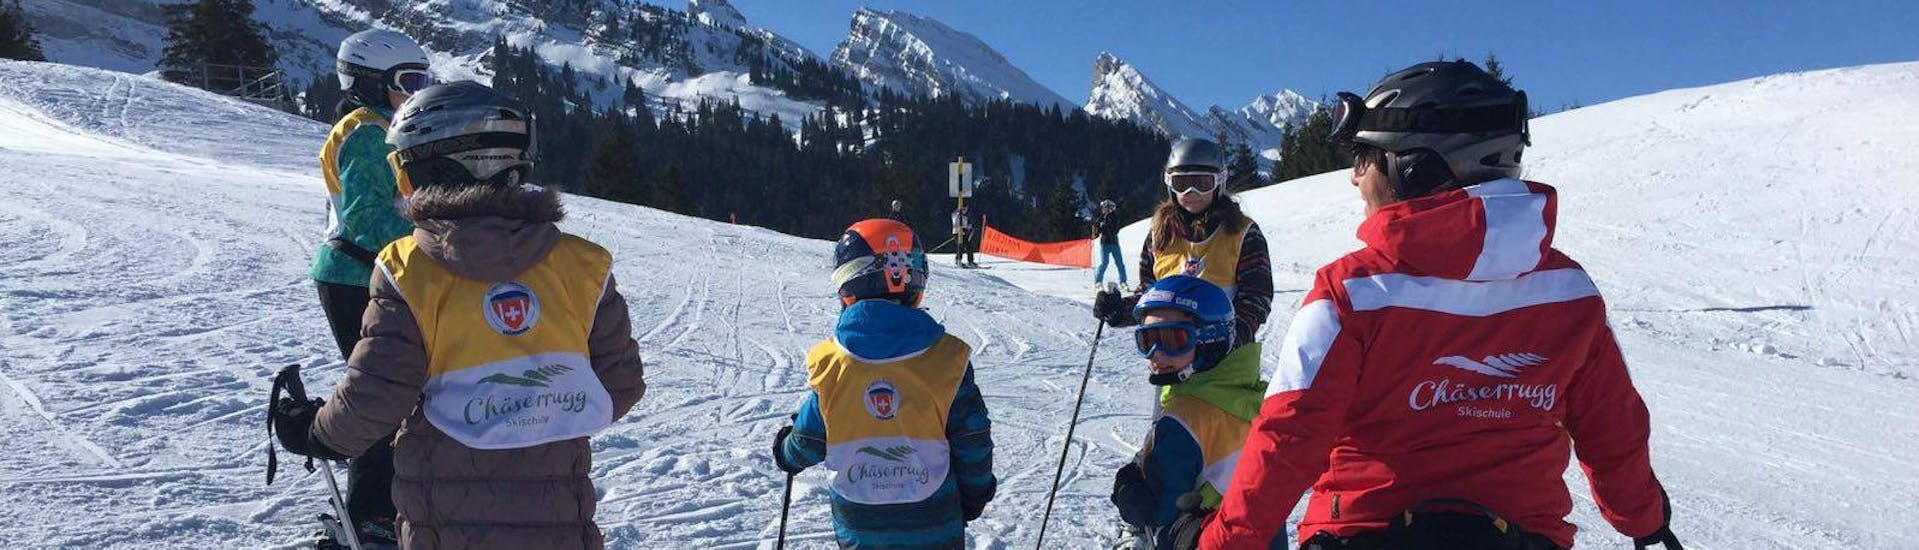 During the Kids Ski Lessons (5-15 years) - All Levels with Swiss Ski School Chäserrugg, a ski instructor and her group of young skiers are admiring the beautiful mountains of the Chäserrugg ski resort.